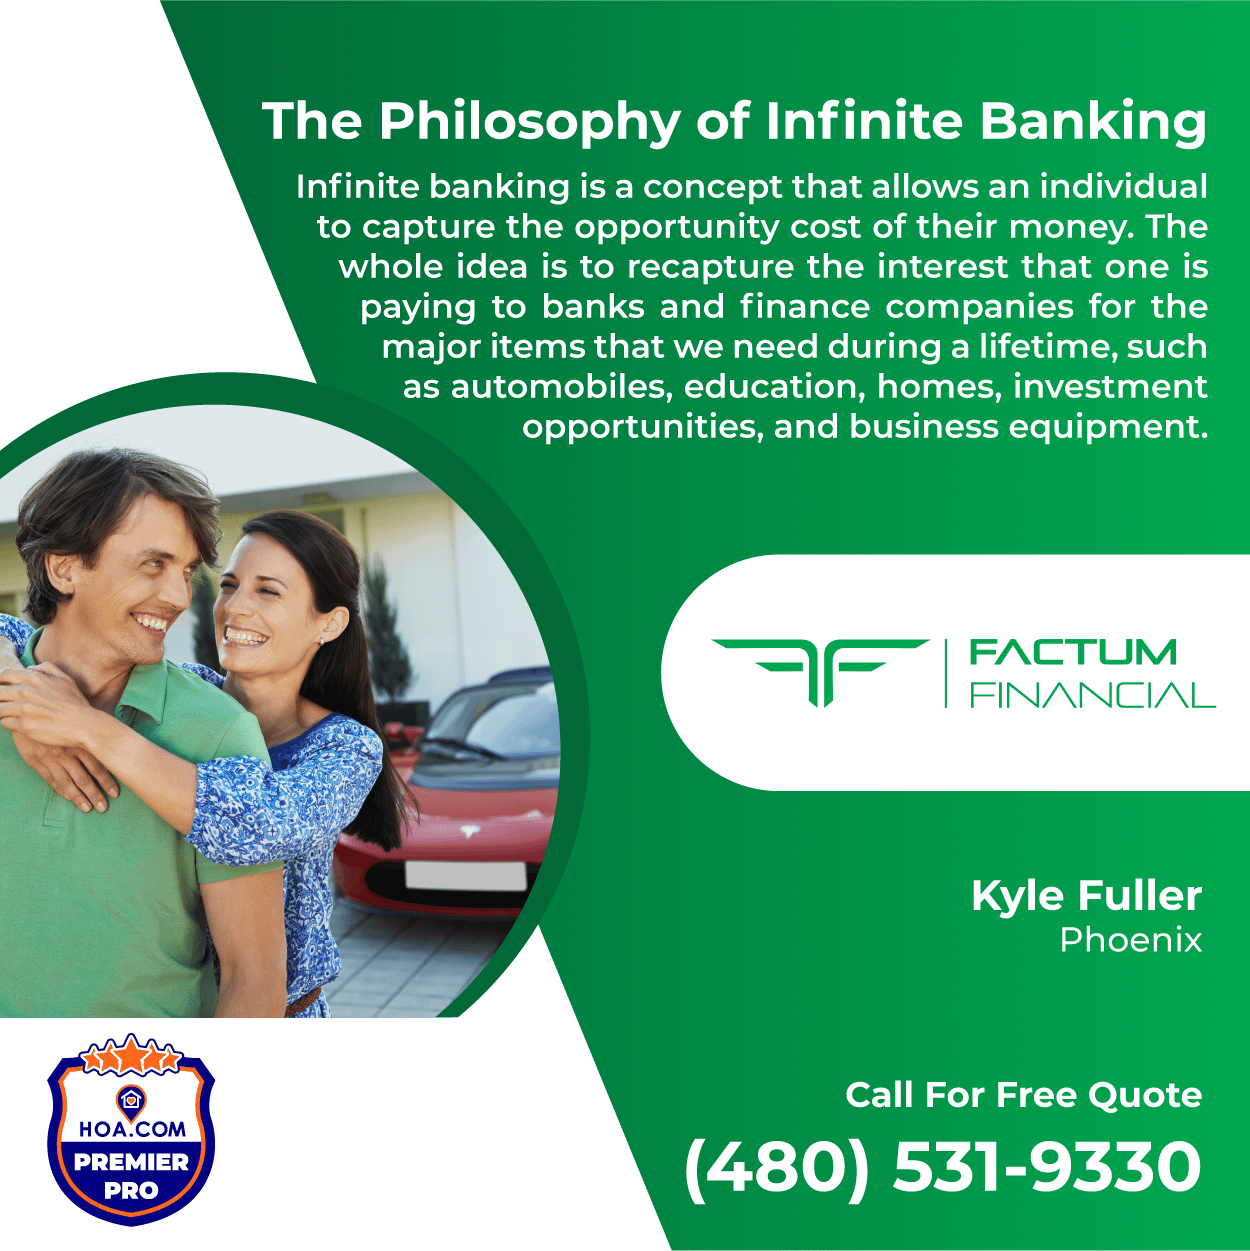 The Philosophy of Infinite Banking